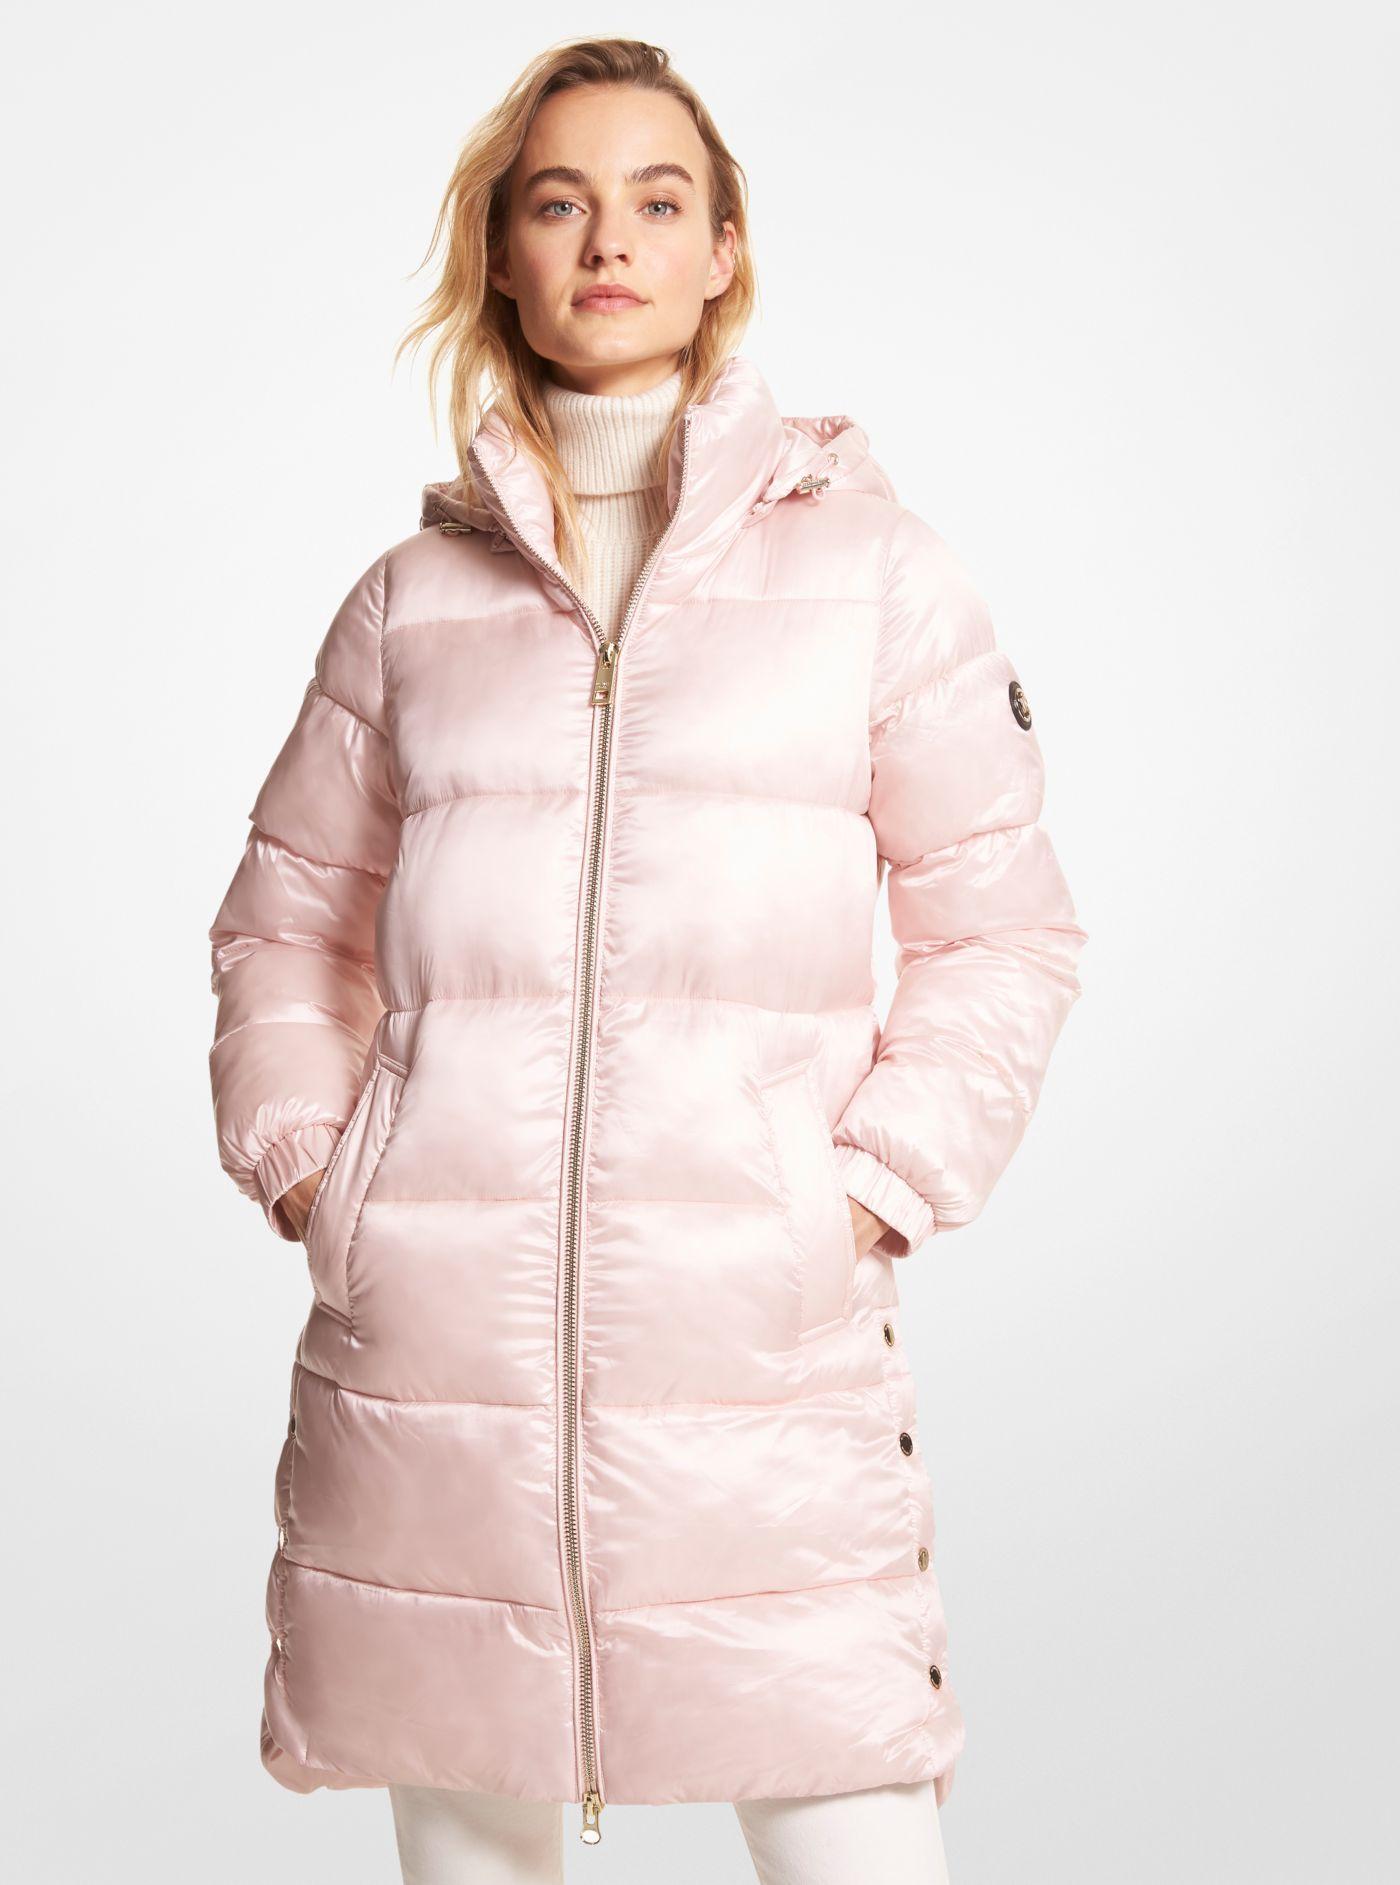 Michael Kors Metallic Satin Ciré Quilted Puffer Coat in Pink | Lyst Canada